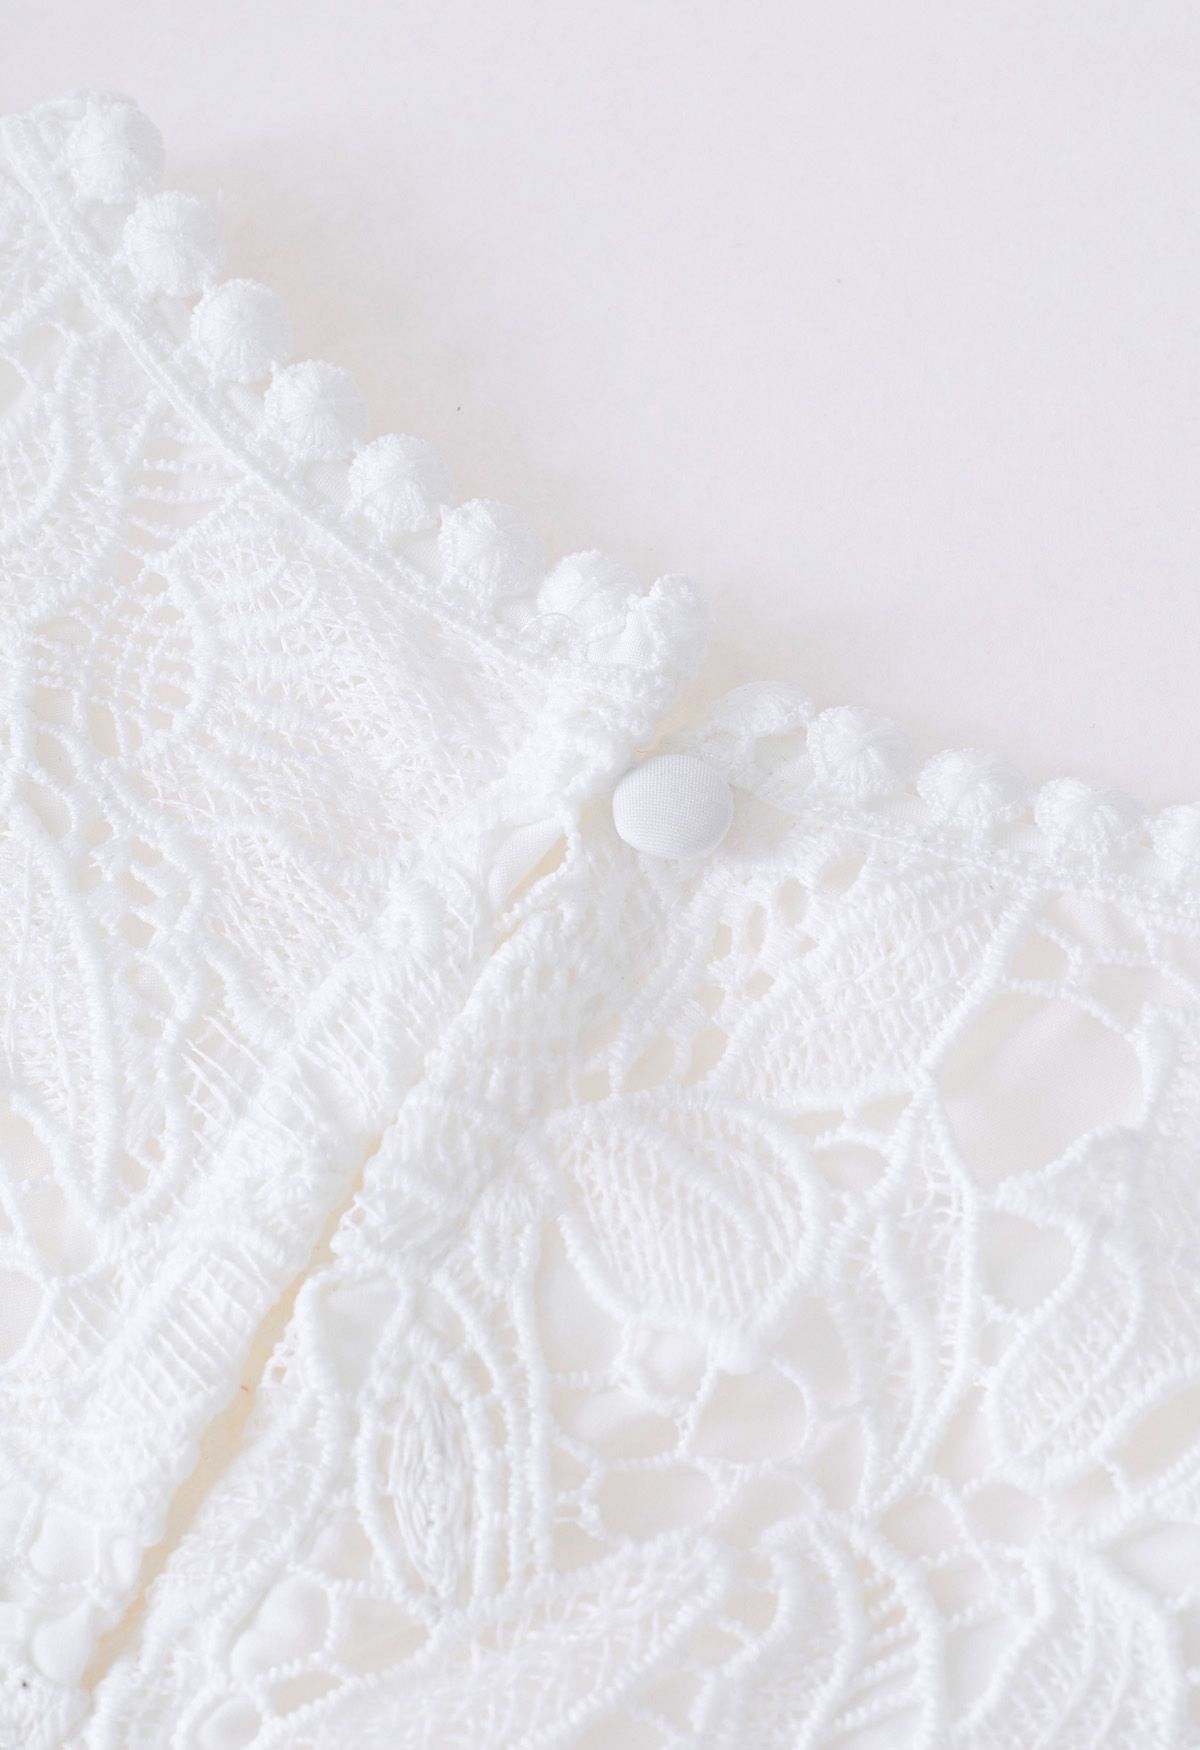 Lily Crochet Lace Crop Top in White - Retro, Indie and Unique Fashion